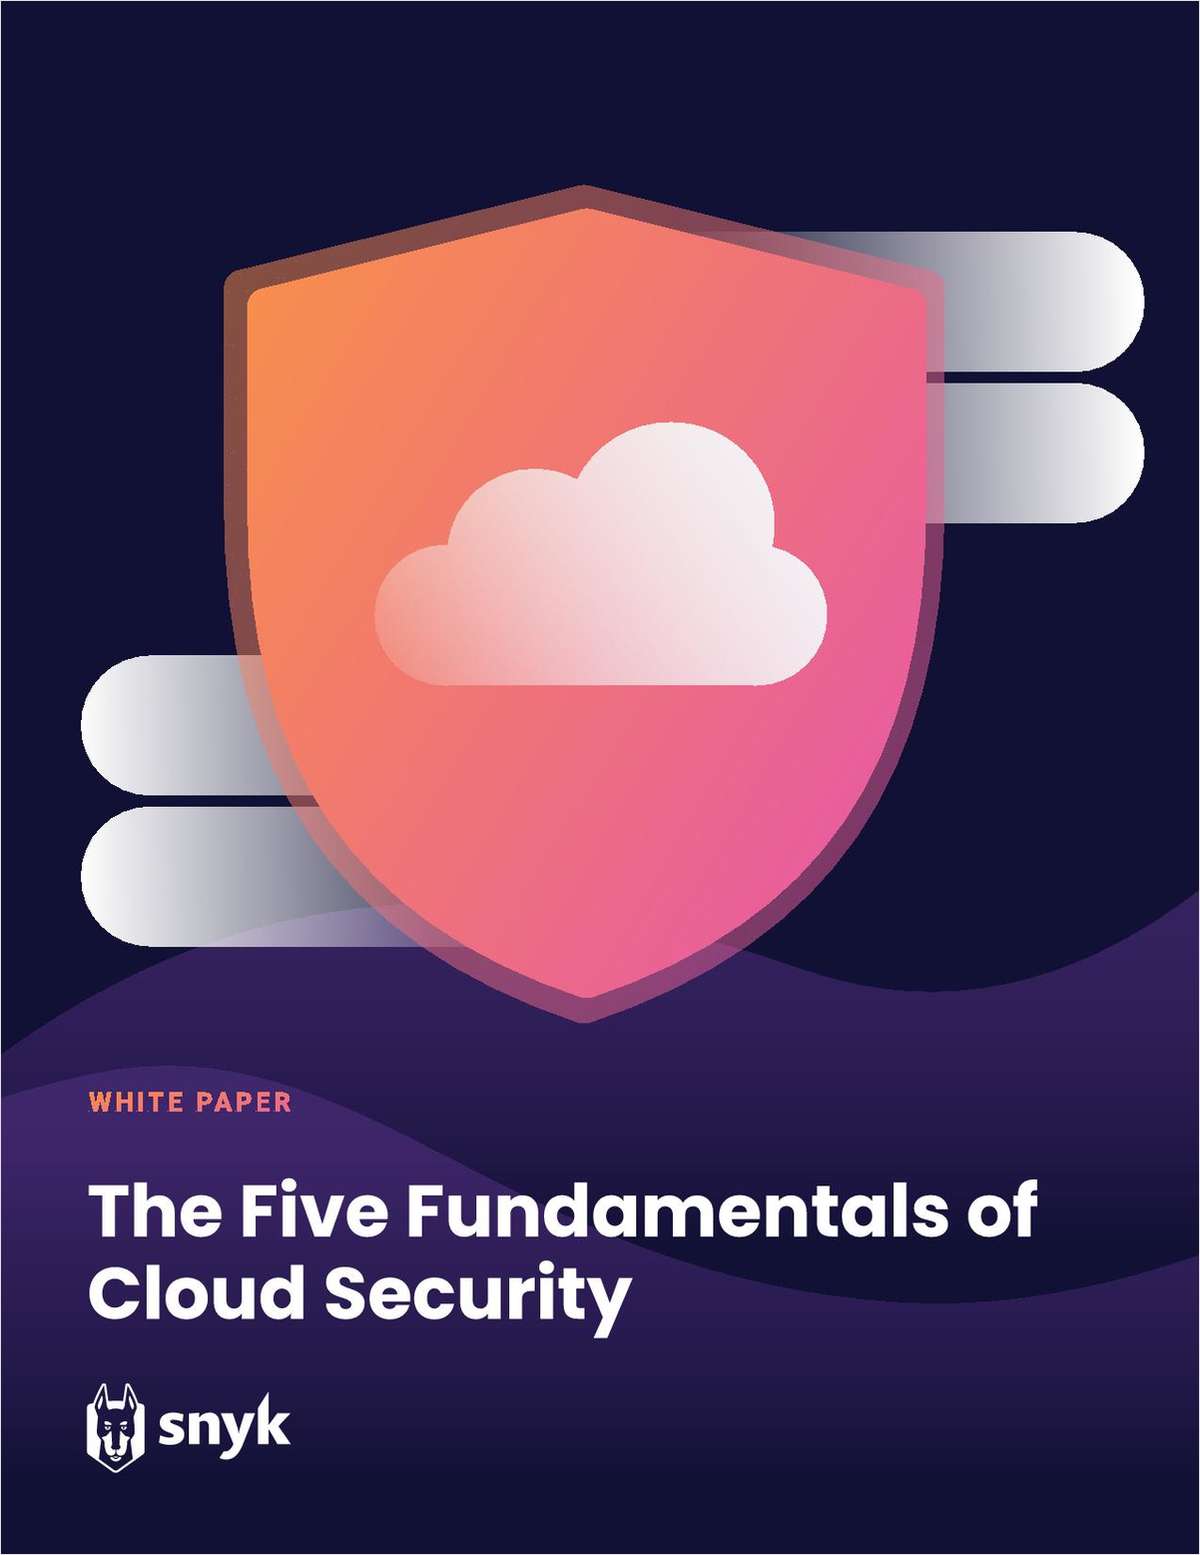 The Five Fundamentals of Cloud Security